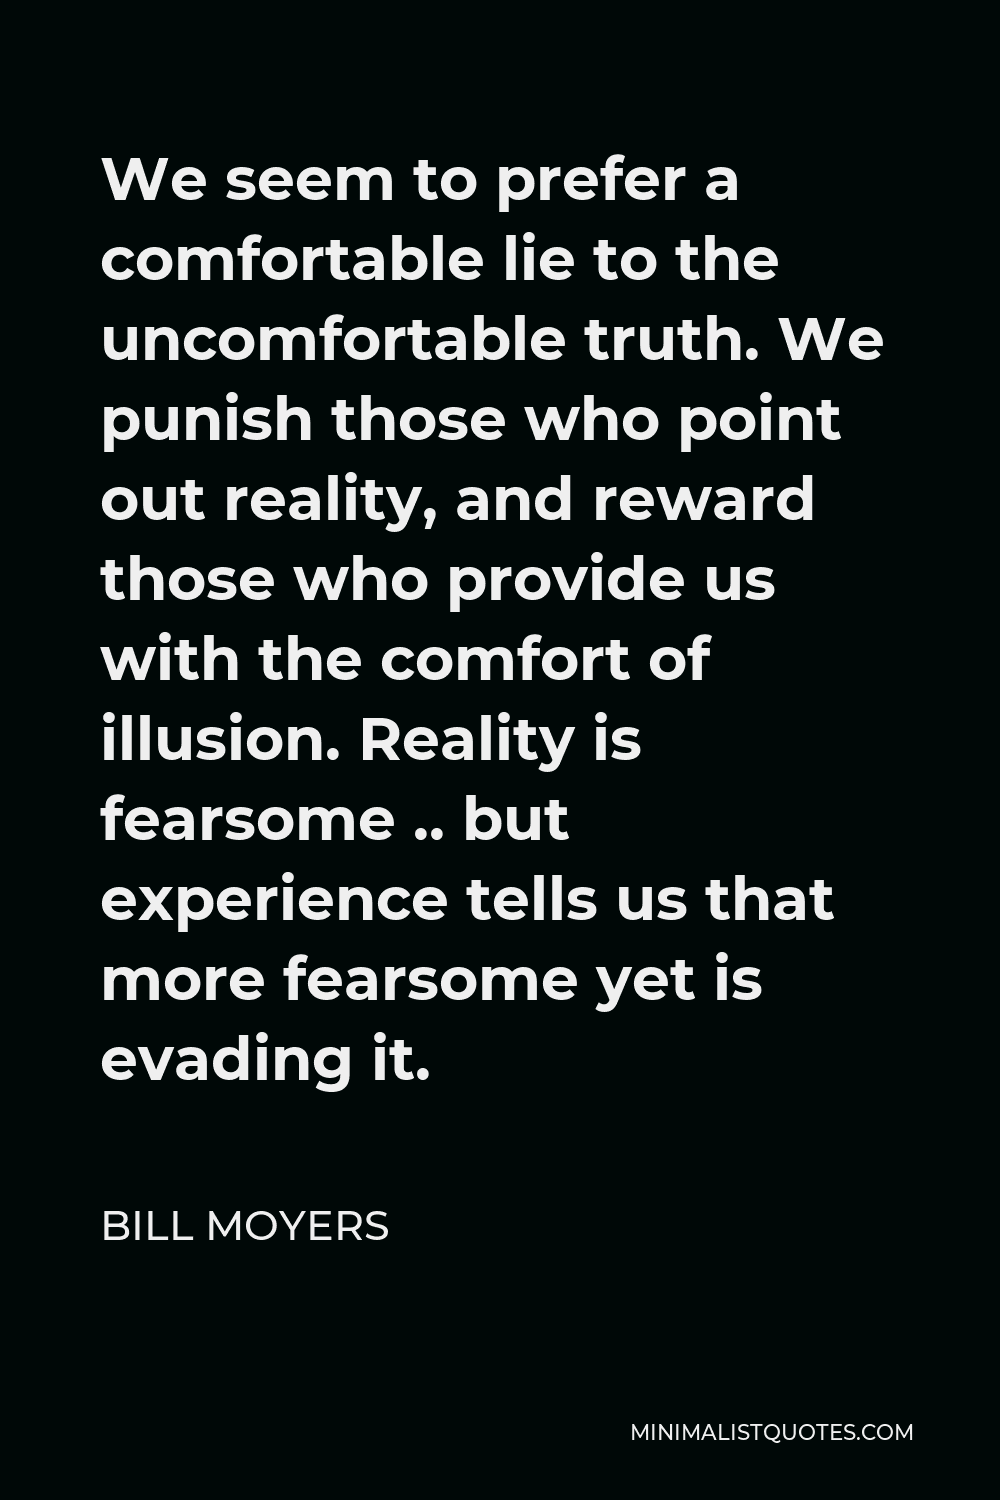 Bill Moyers Quote - We seem to prefer a comfortable lie to the uncomfortable truth. We punish those who point out reality, and reward those who provide us with the comfort of illusion. Reality is fearsome .. but experience tells us that more fearsome yet is evading it.